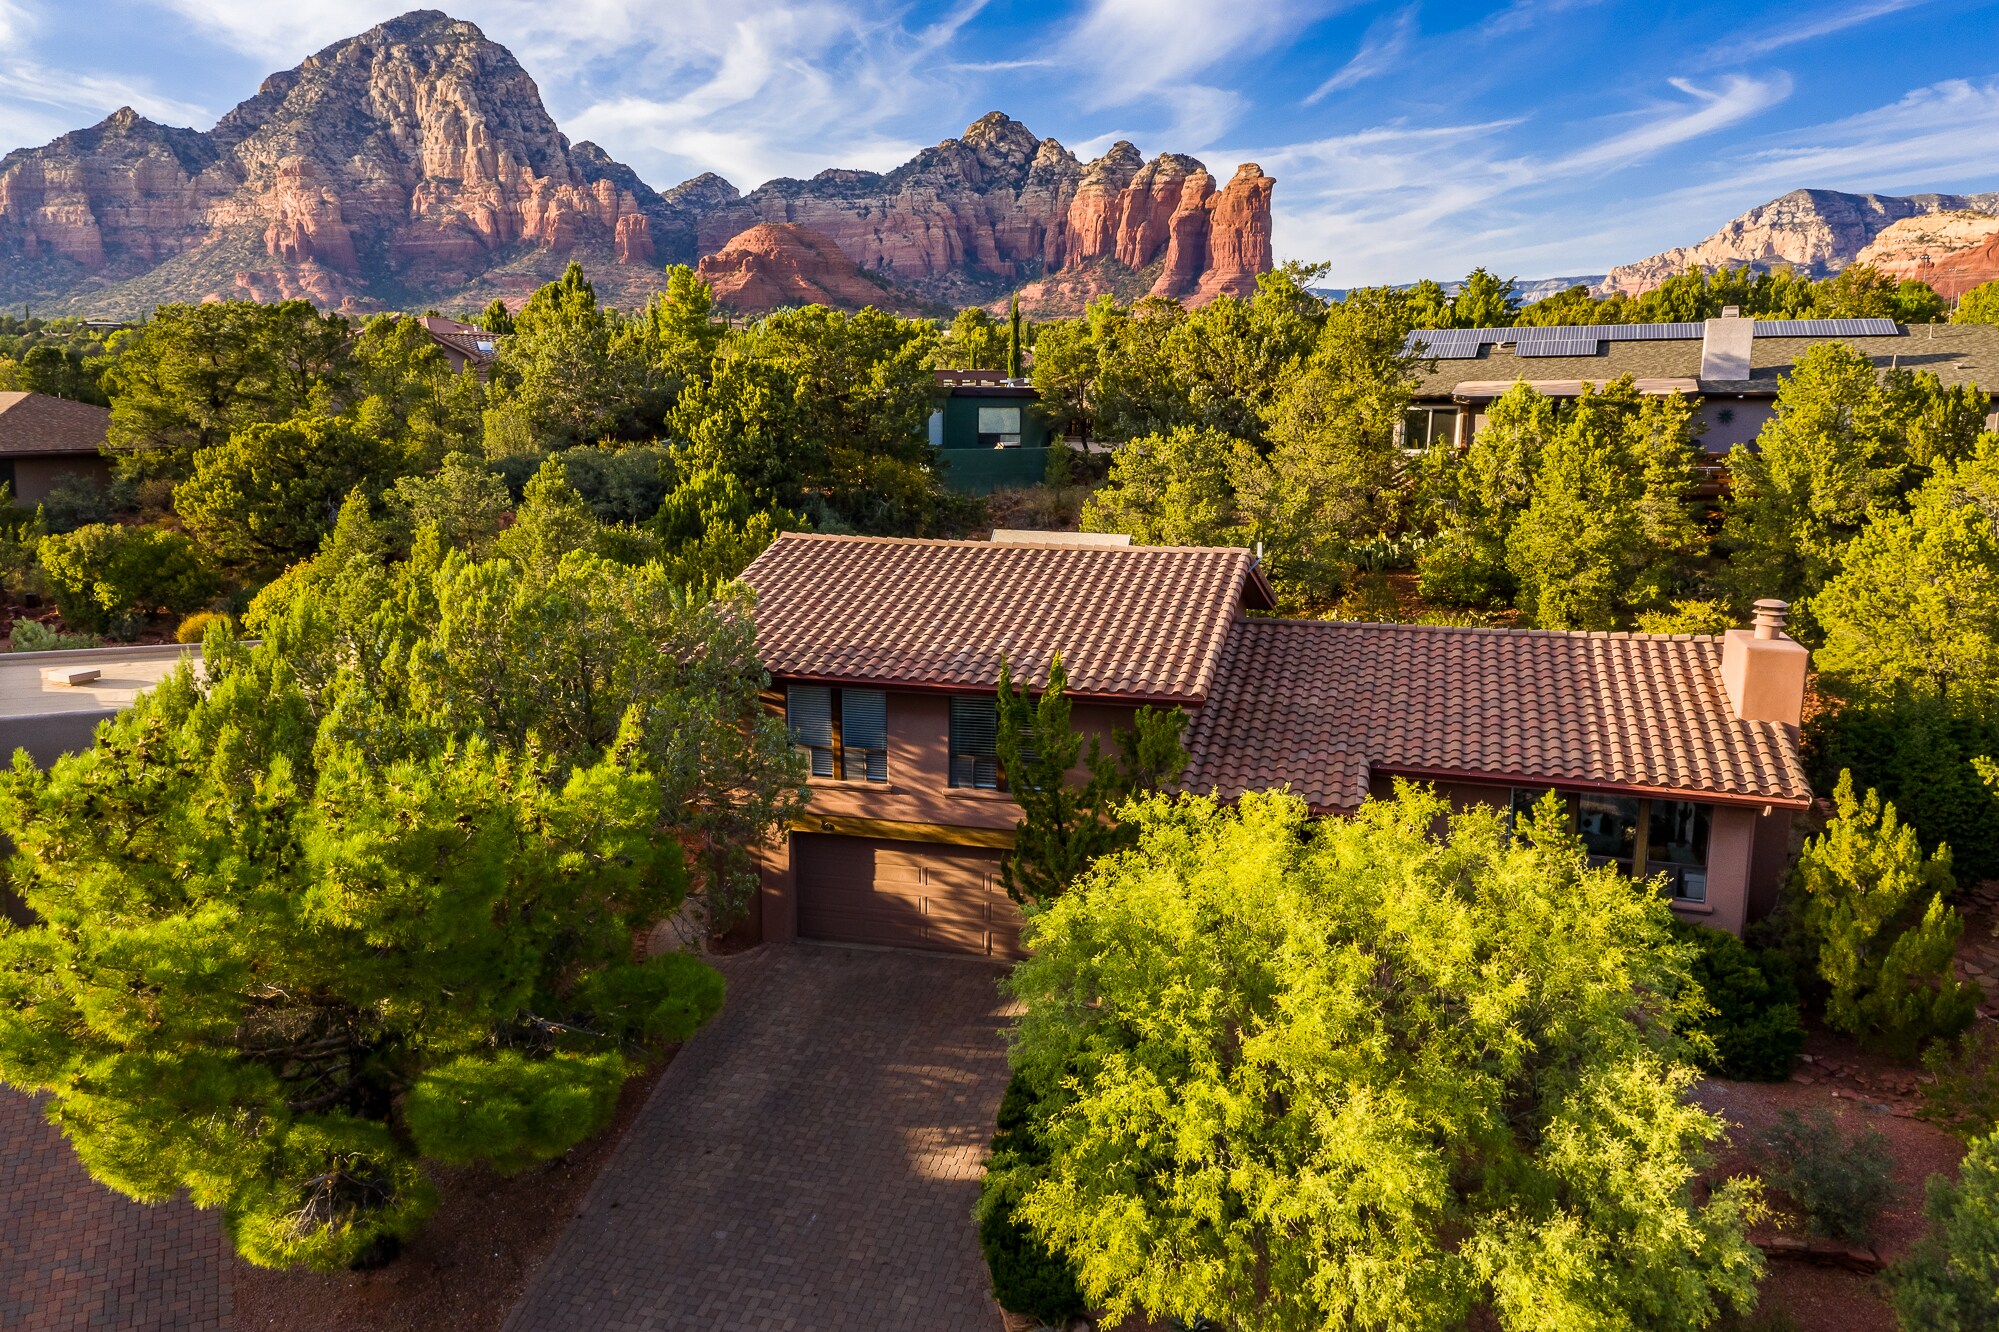 Located in West Sedona and Surrounded by Red Rock Vistas